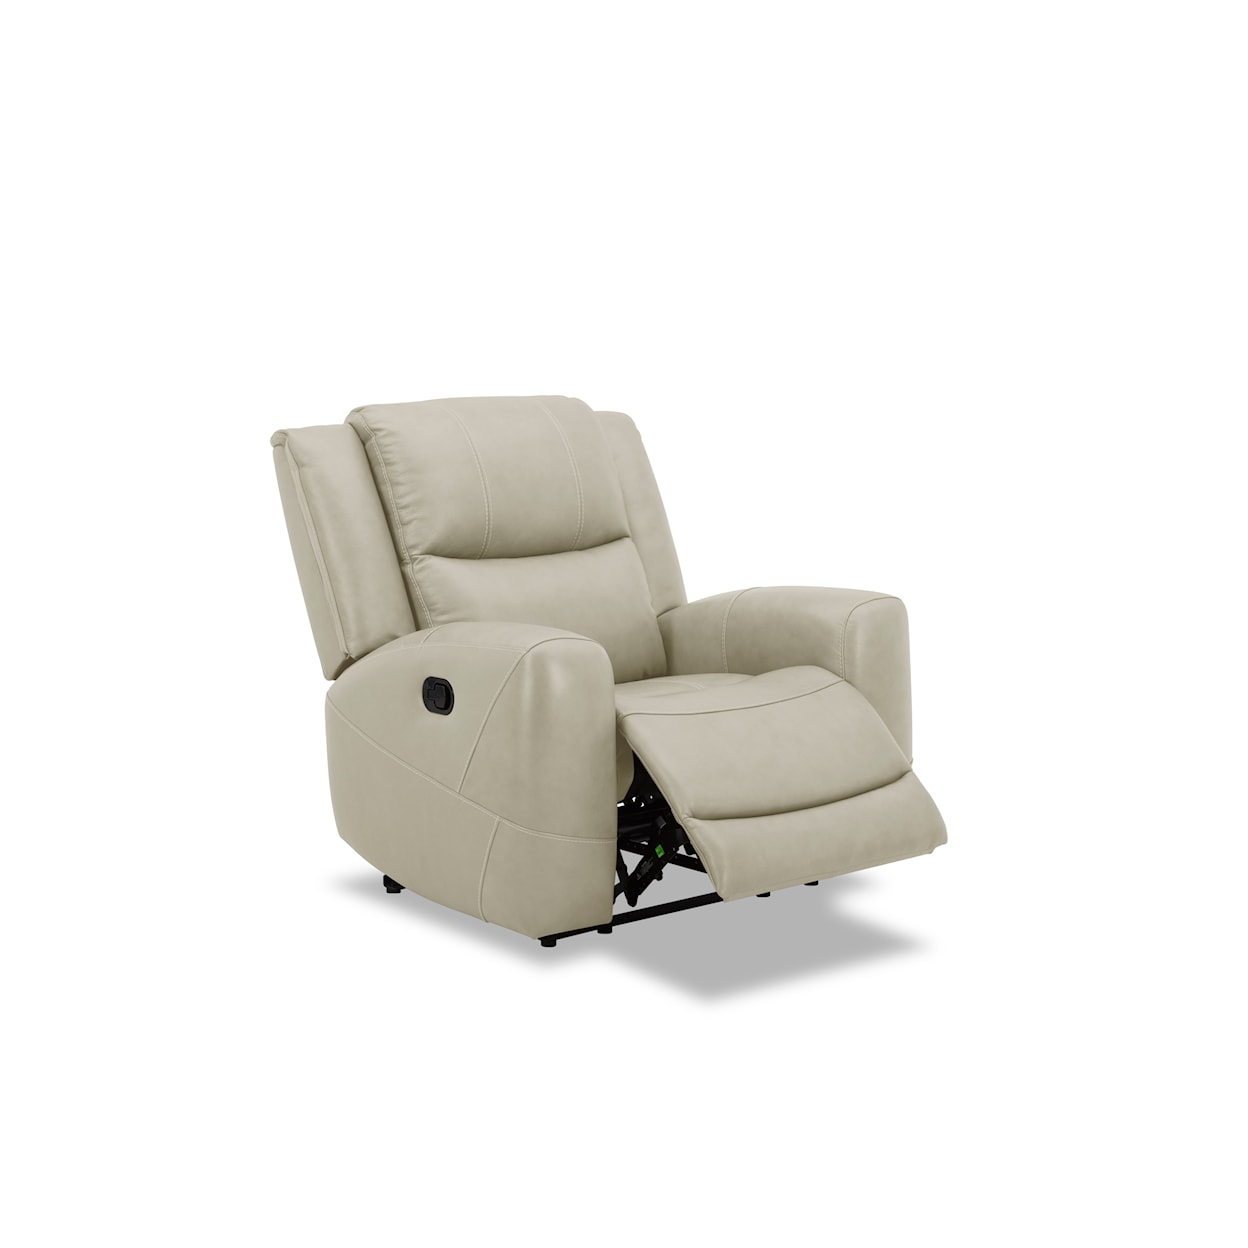 Kuka Home 6228 Leather Collection 6228 Argenta Leather Dual Power recliner